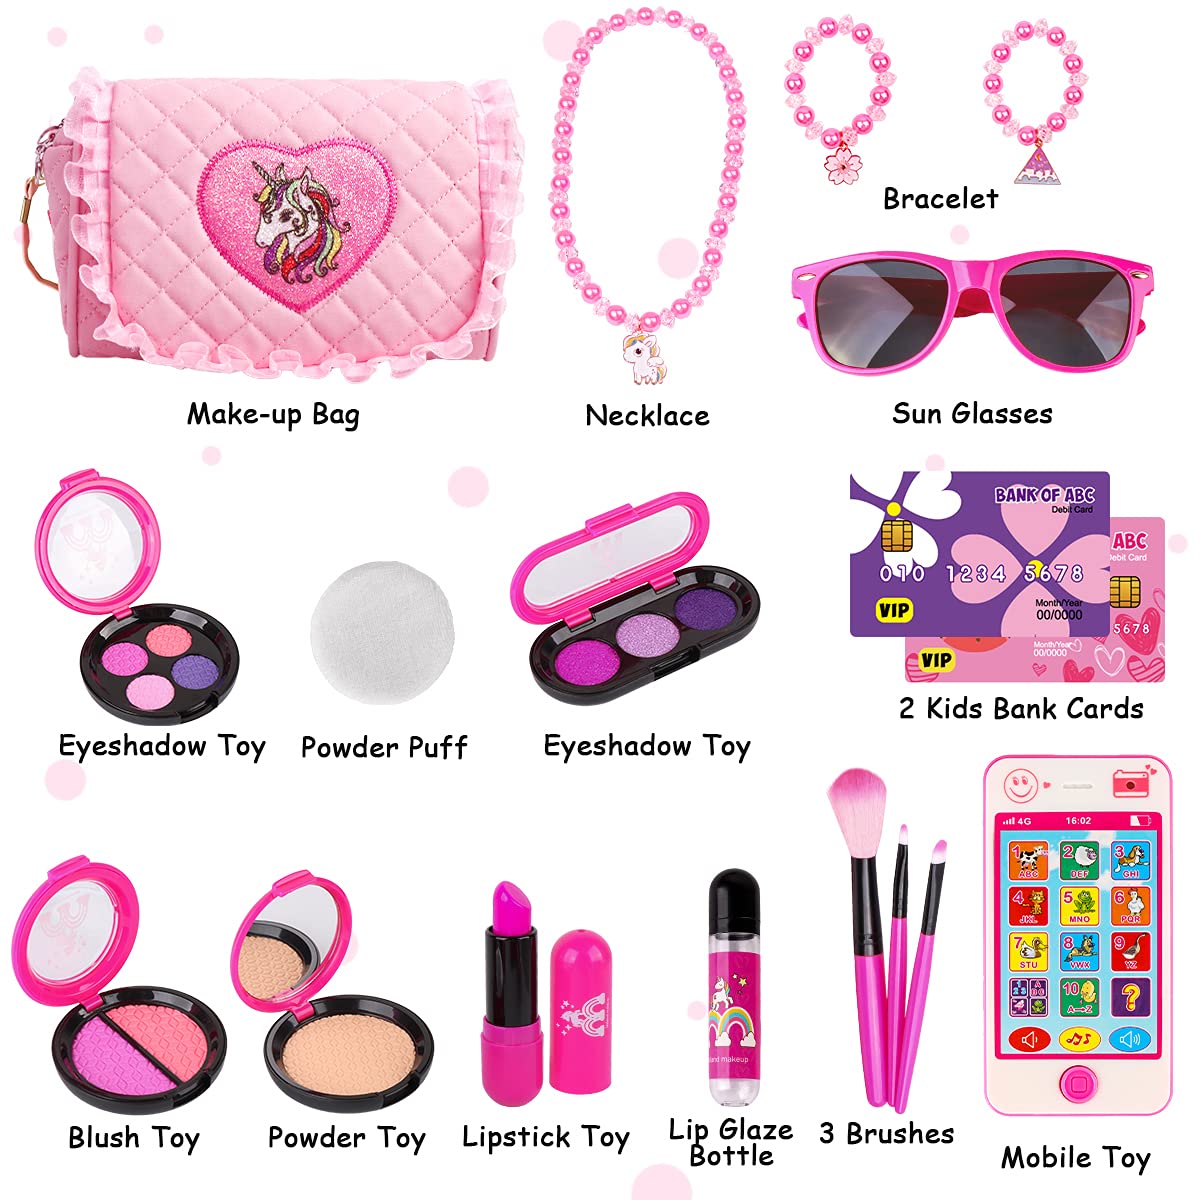 Meland Kids Makeup Kit - Girl Pretend Play Makeup & My First Purse Toy for Toddler Gifts with Pink Princess Purse, Smartphone, Sunglasses, Credit Card, Lipstick,Brush,Lights Up & Make Real Life Sounds